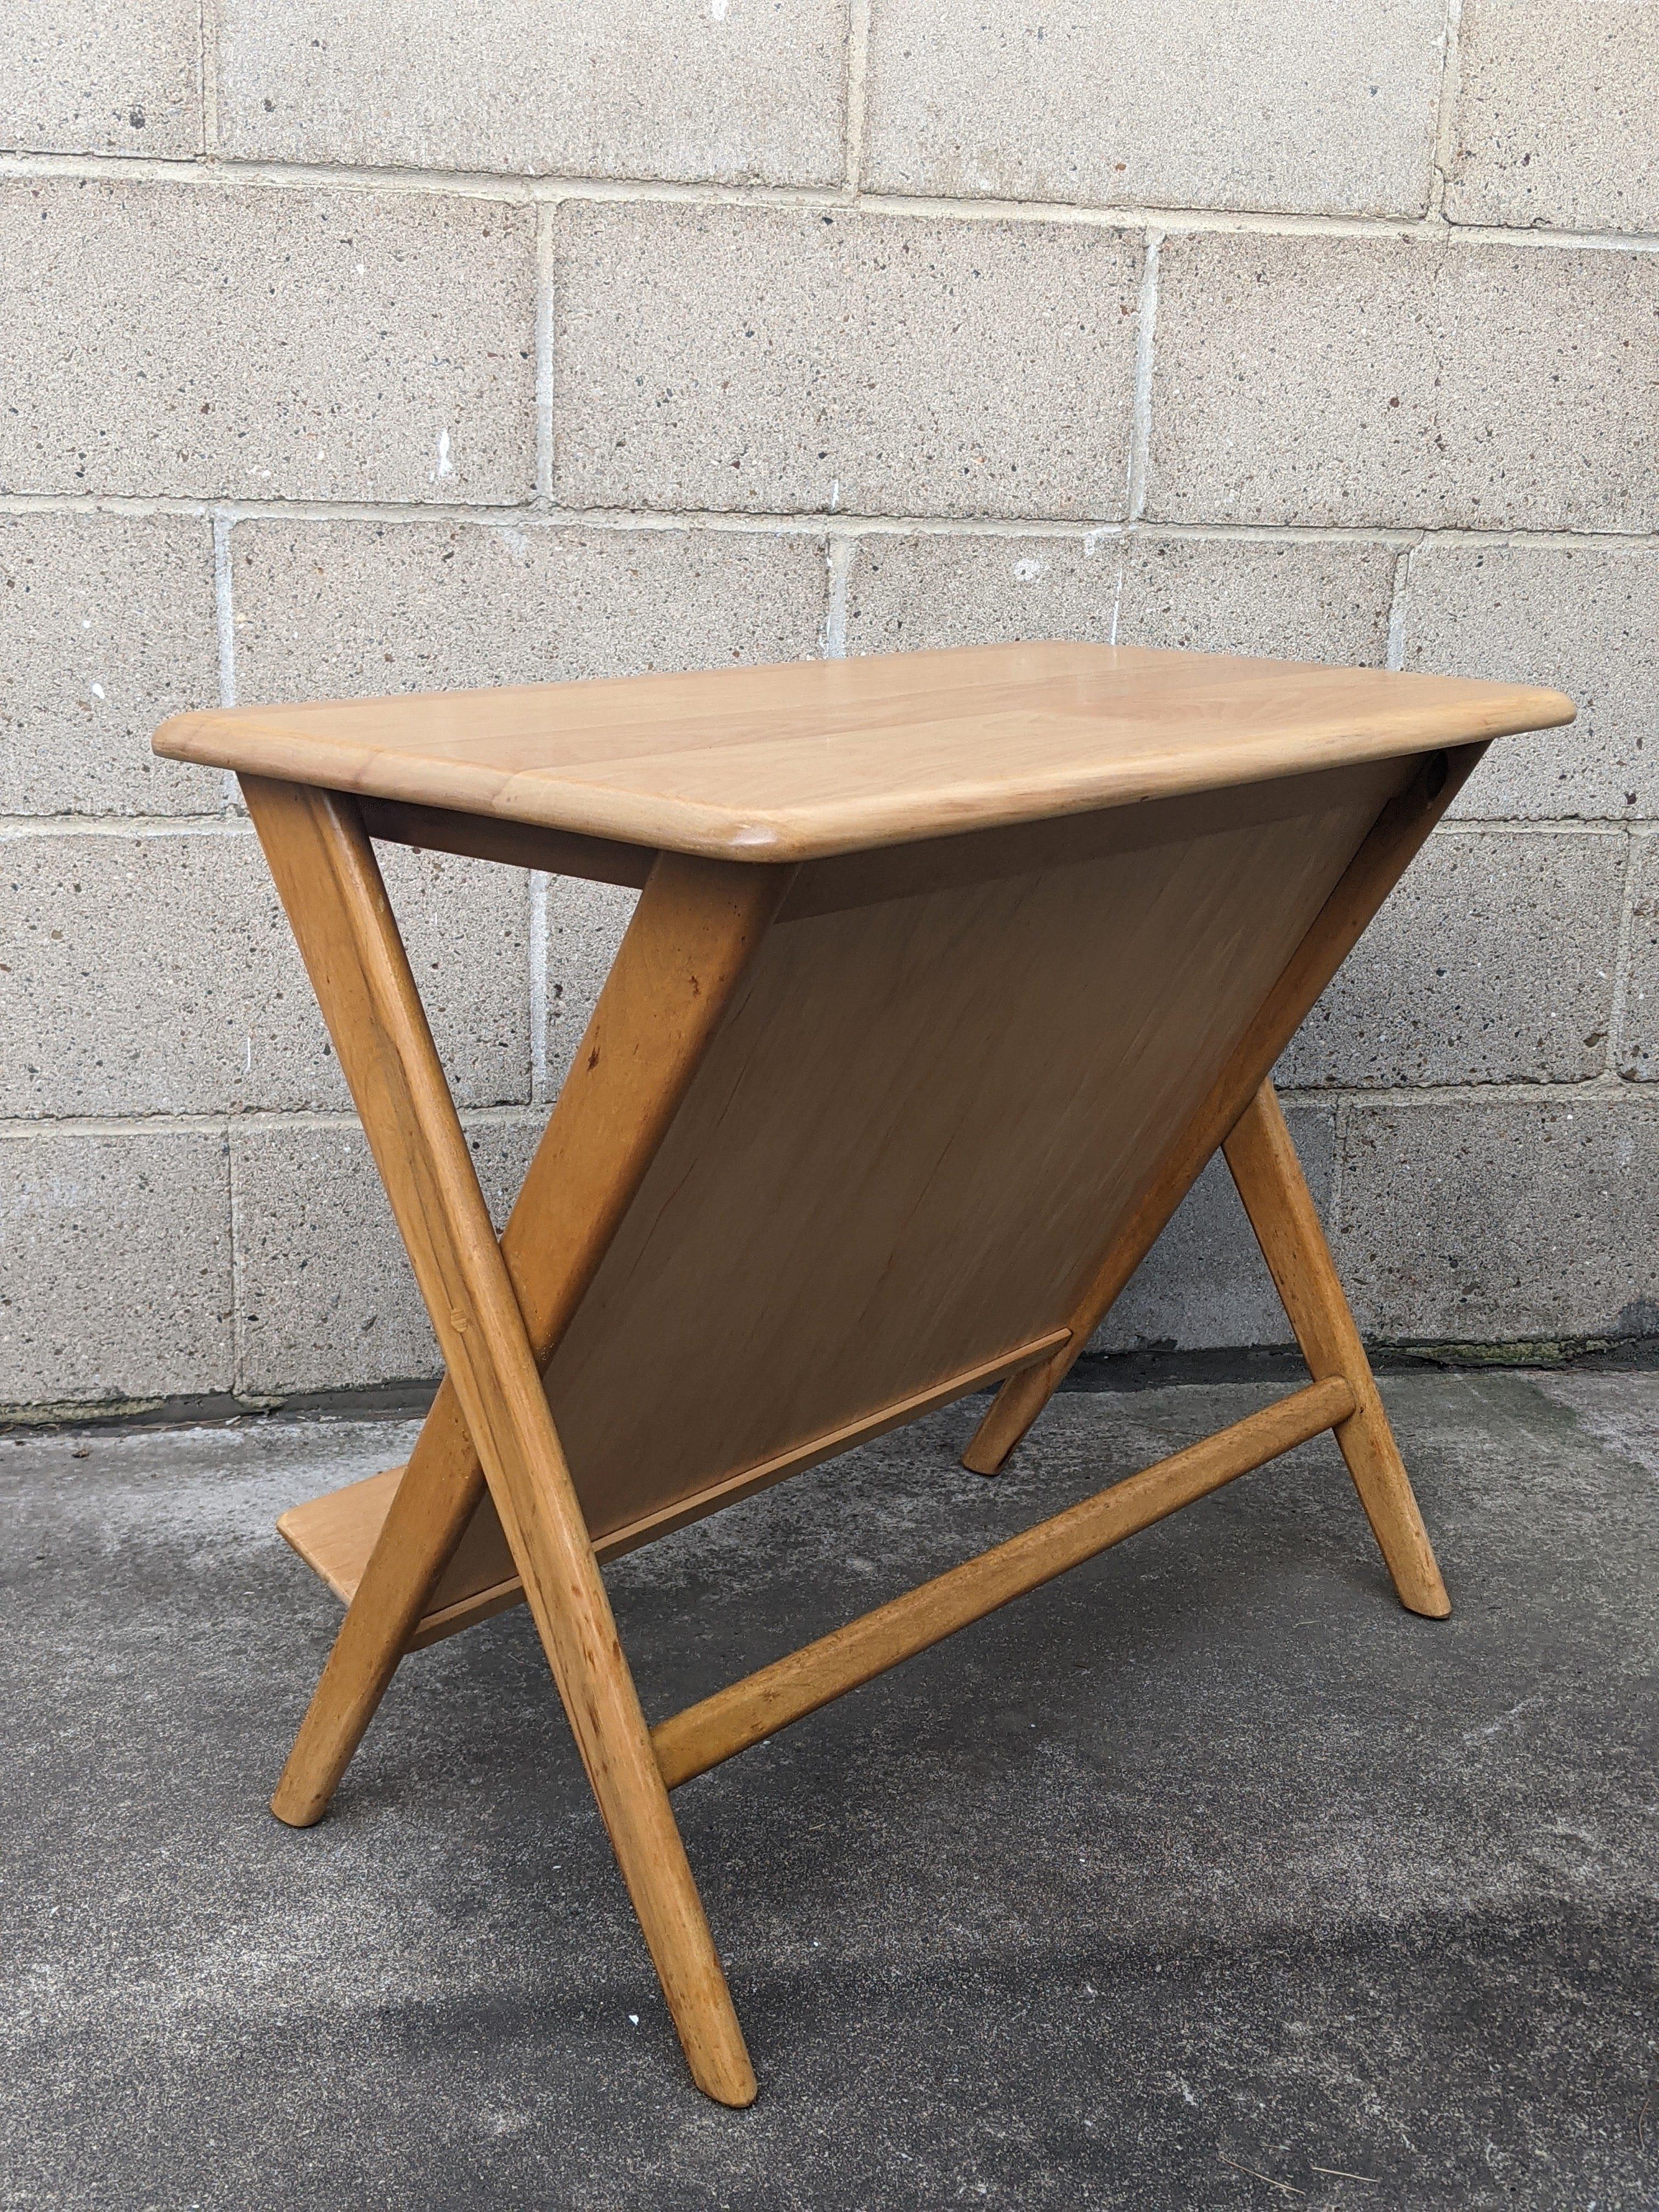 1960s Heywood Wakefield M503 Magazine Table In Good Condition For Sale In Cedar Falls, IA